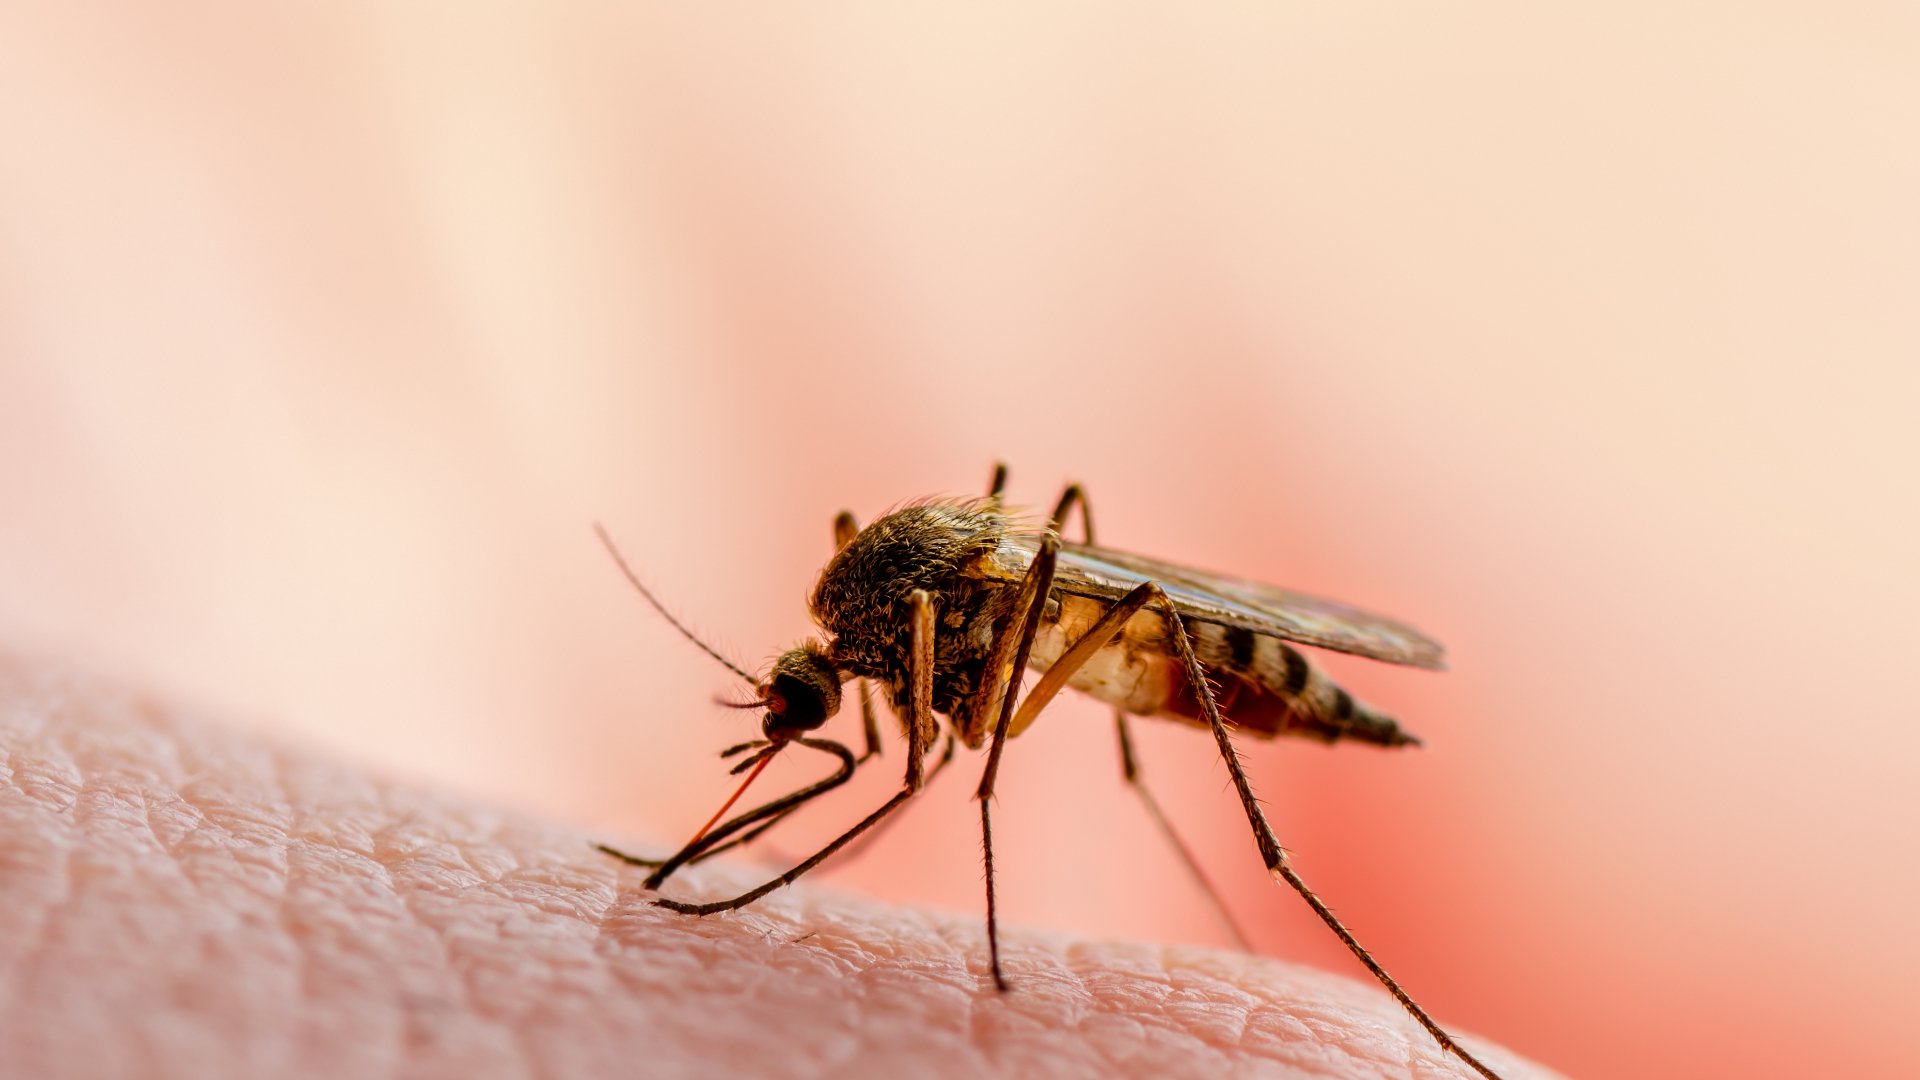 What Can Keep Mosquitoes From Biting You?